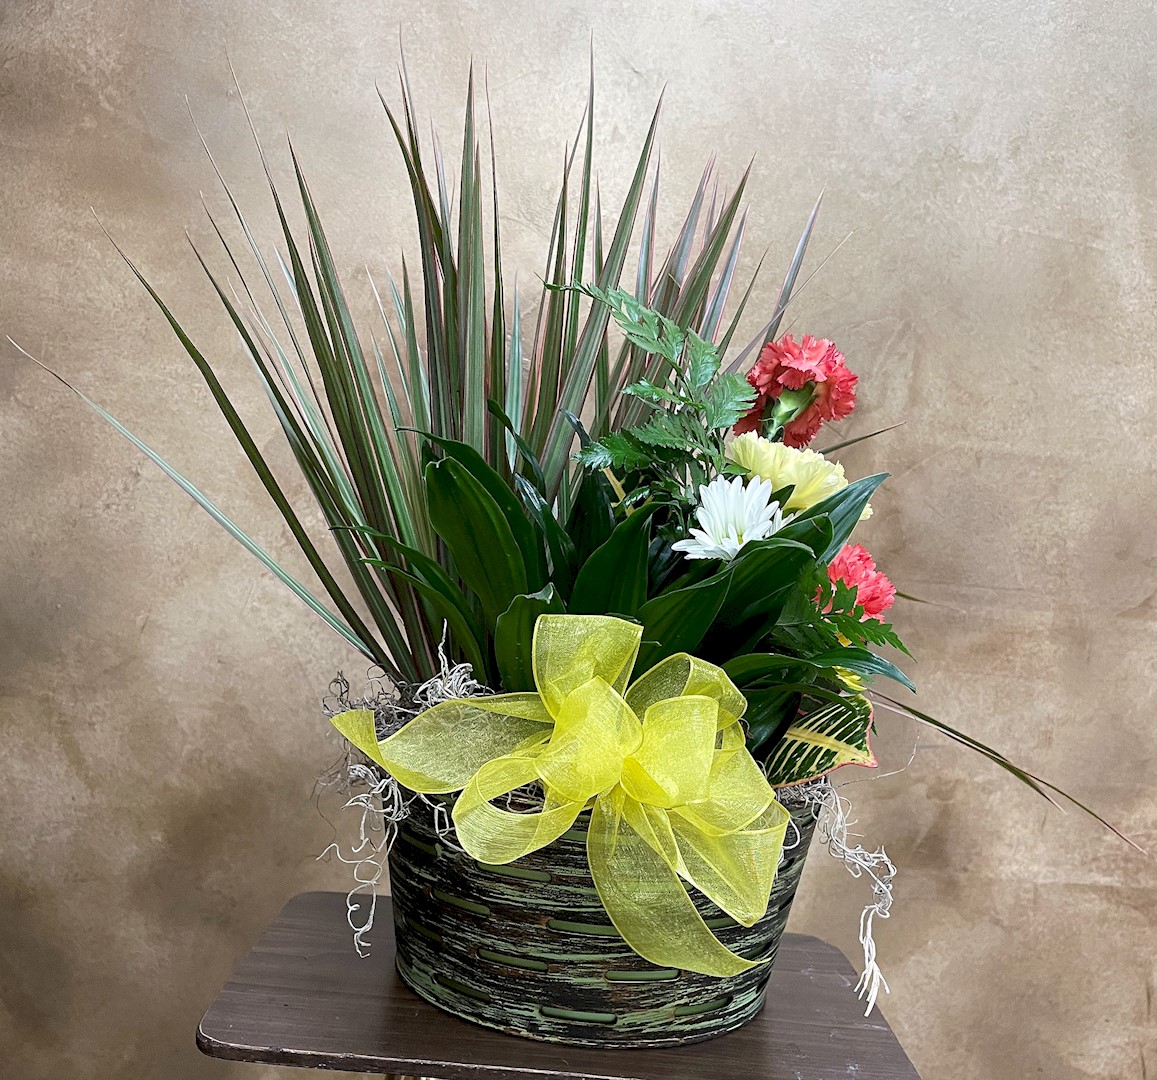 Flowers from Everyone at Forest Products Distributors